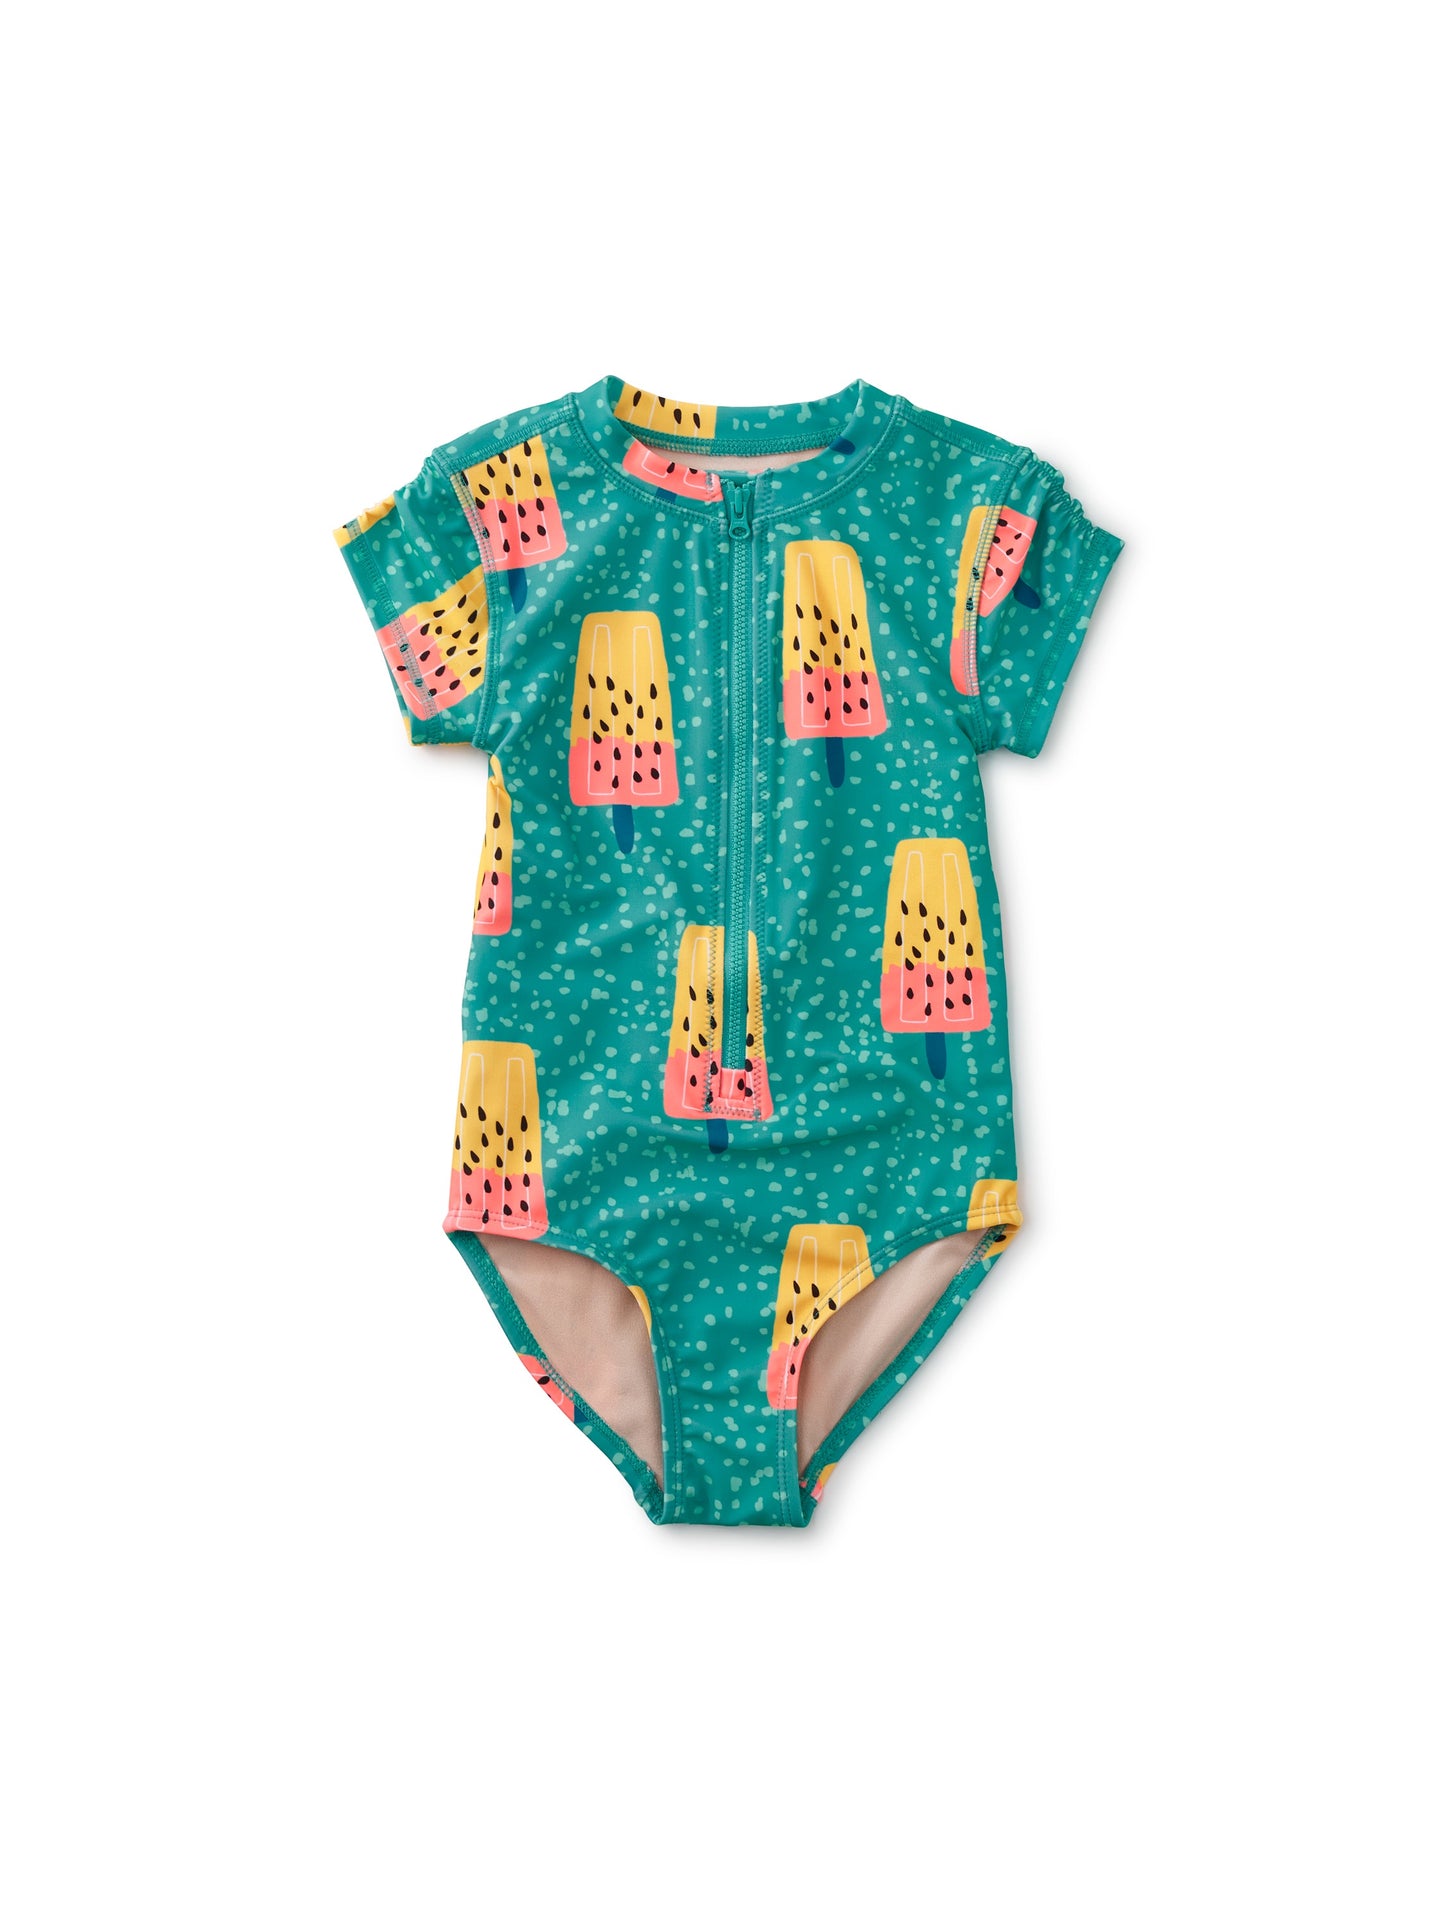 Argyle One Piece Bathing Suit - Designed By Squeaky Chimp T-shirts